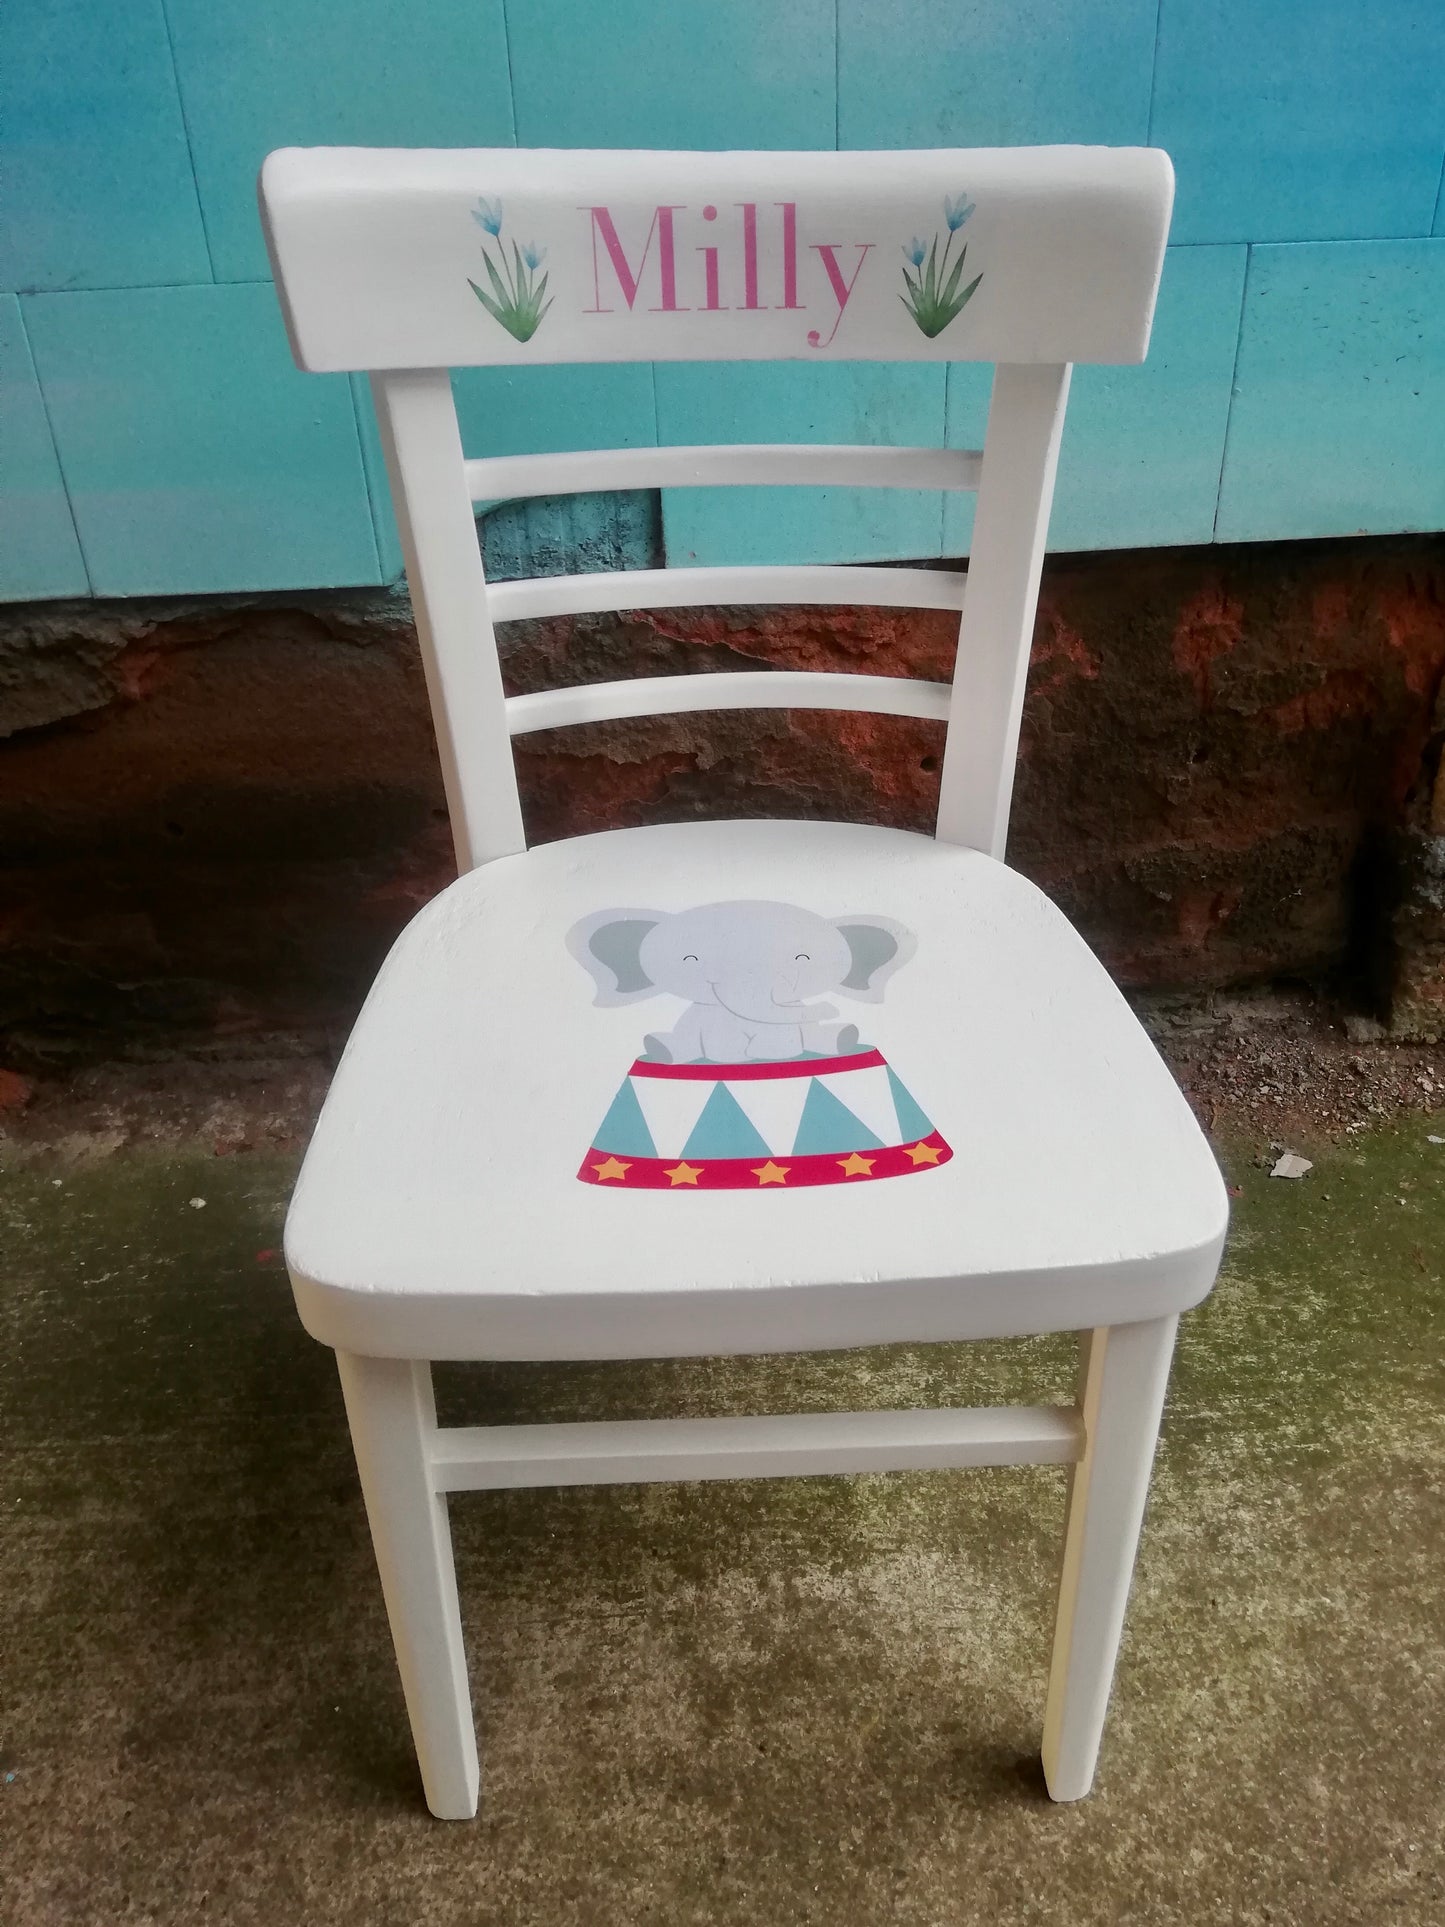 Children's personalised wooden nursery school chair with circus elephant theme and your child's name